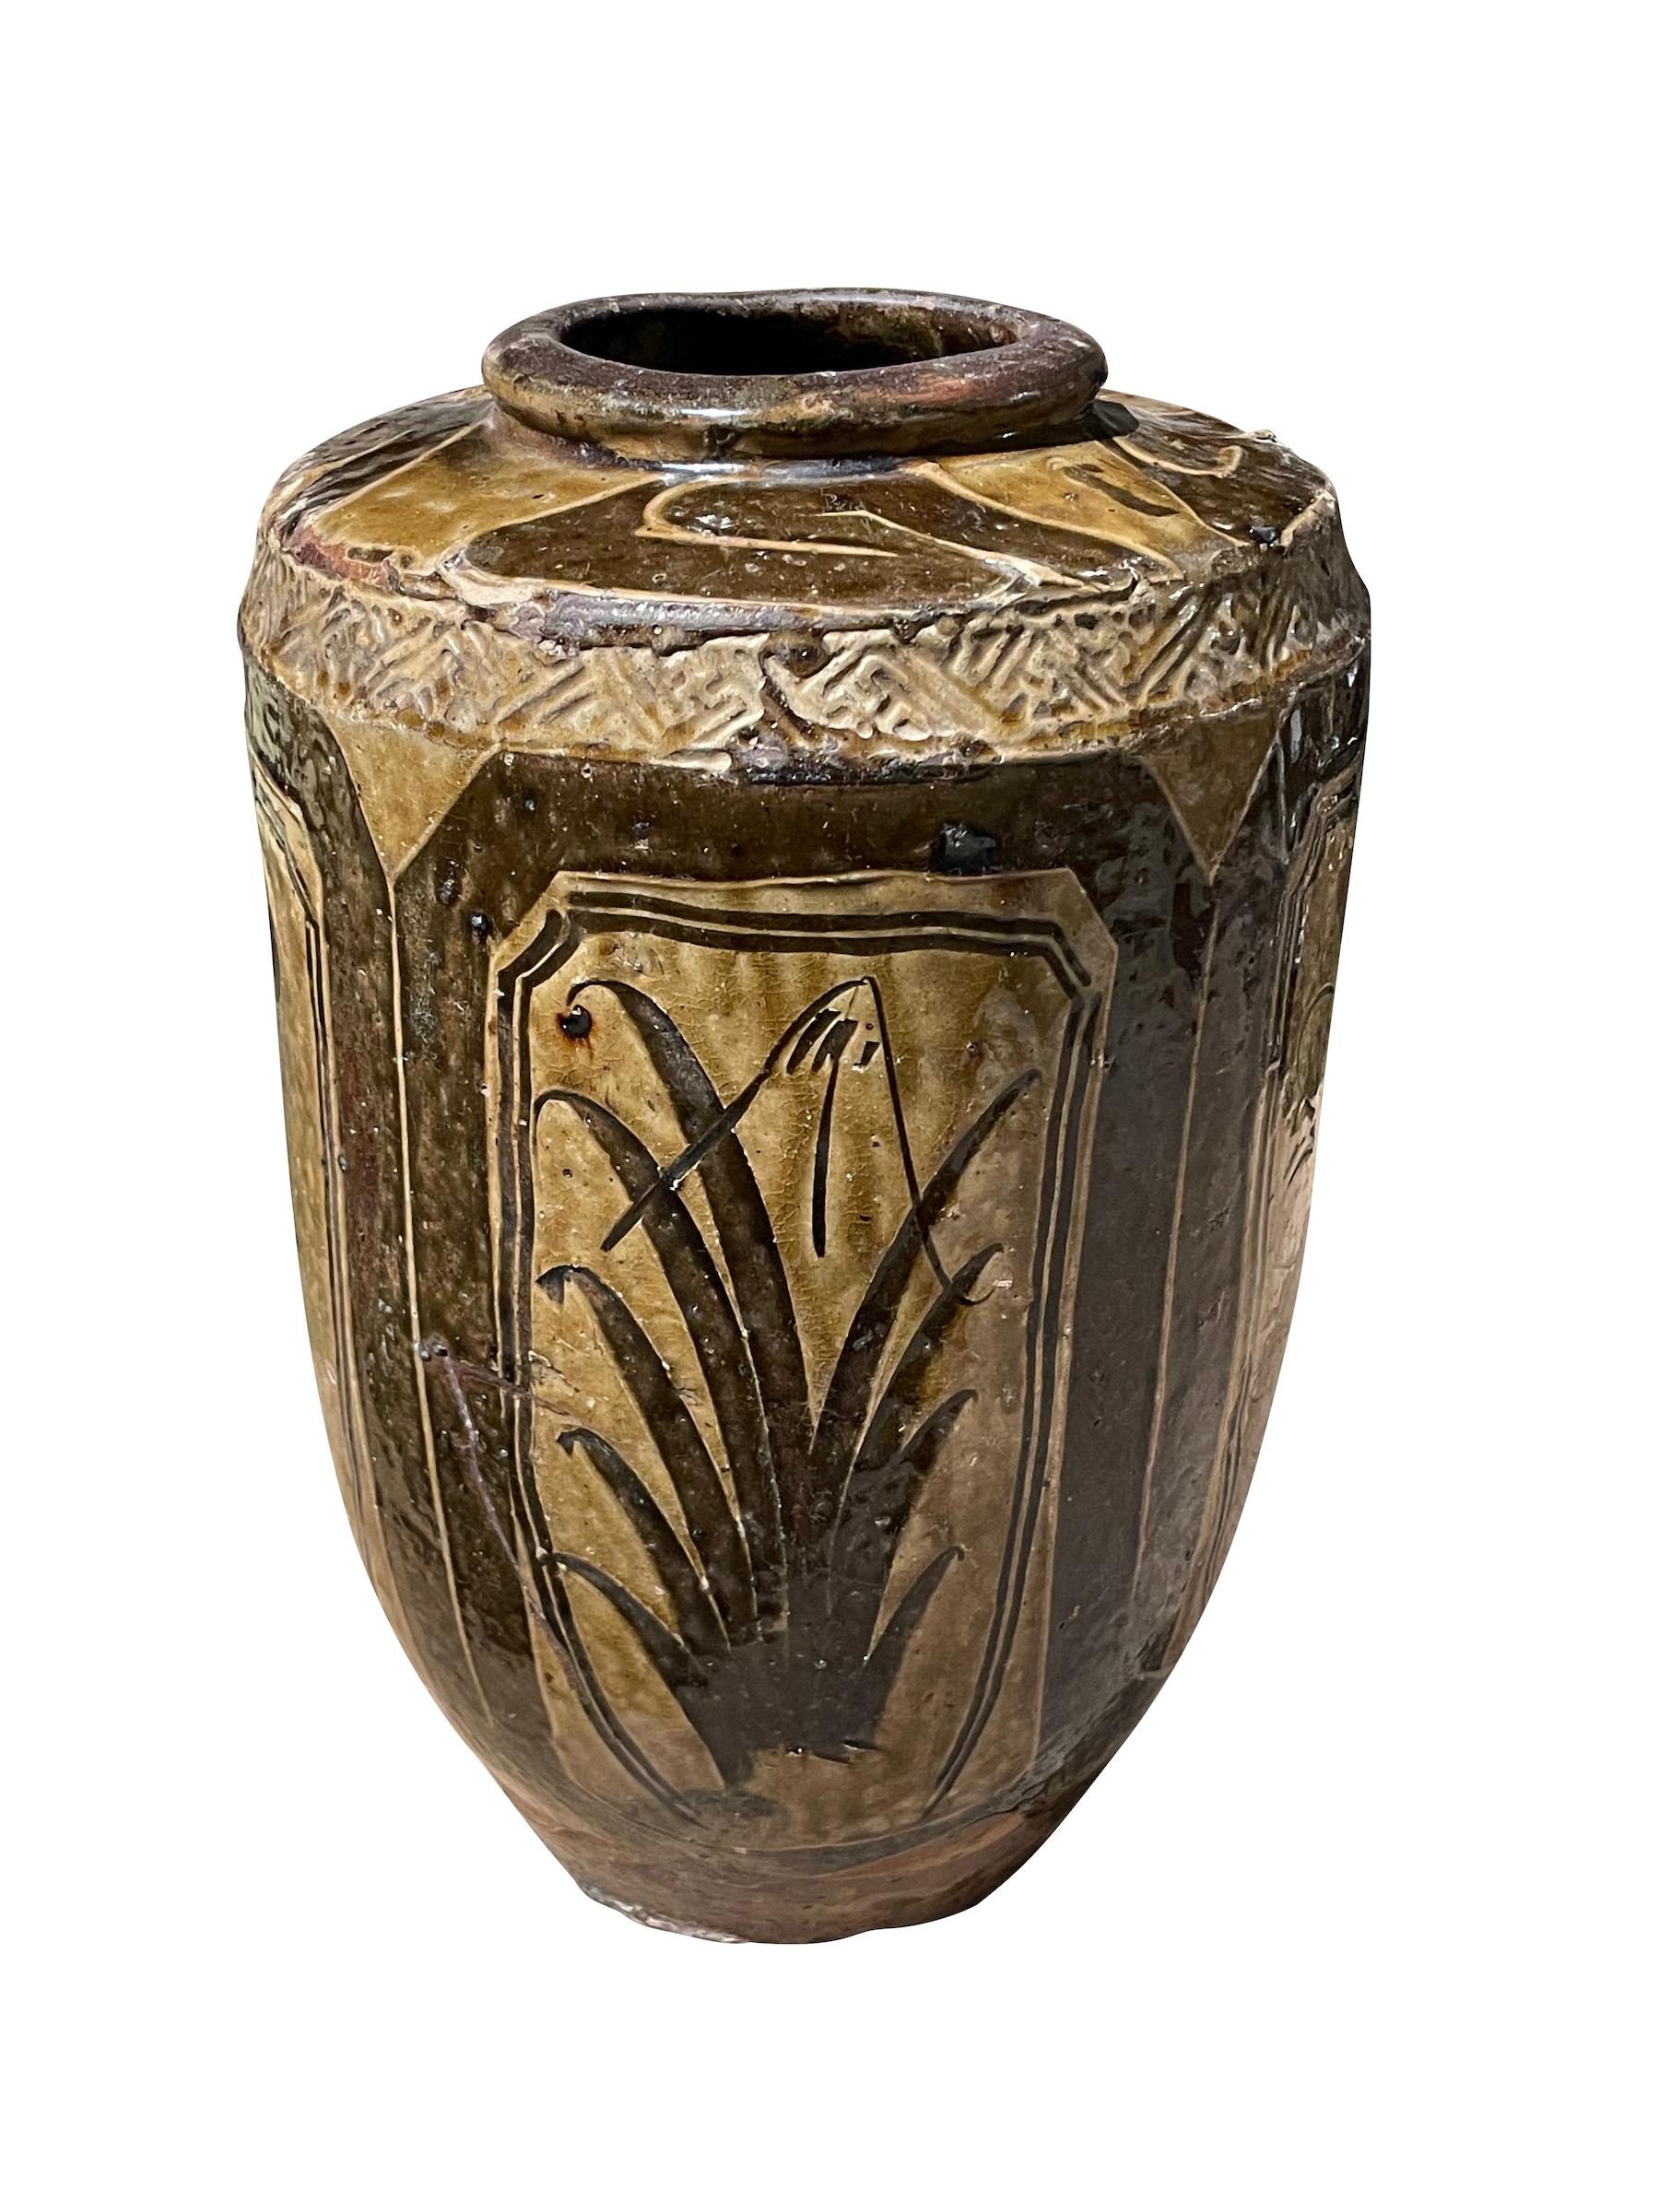 19thc Chinese barrel shaped vase in traditional olive/gold glaze.
Natural aged patina and wear.
Palm motif design.
Part of a large collection.
